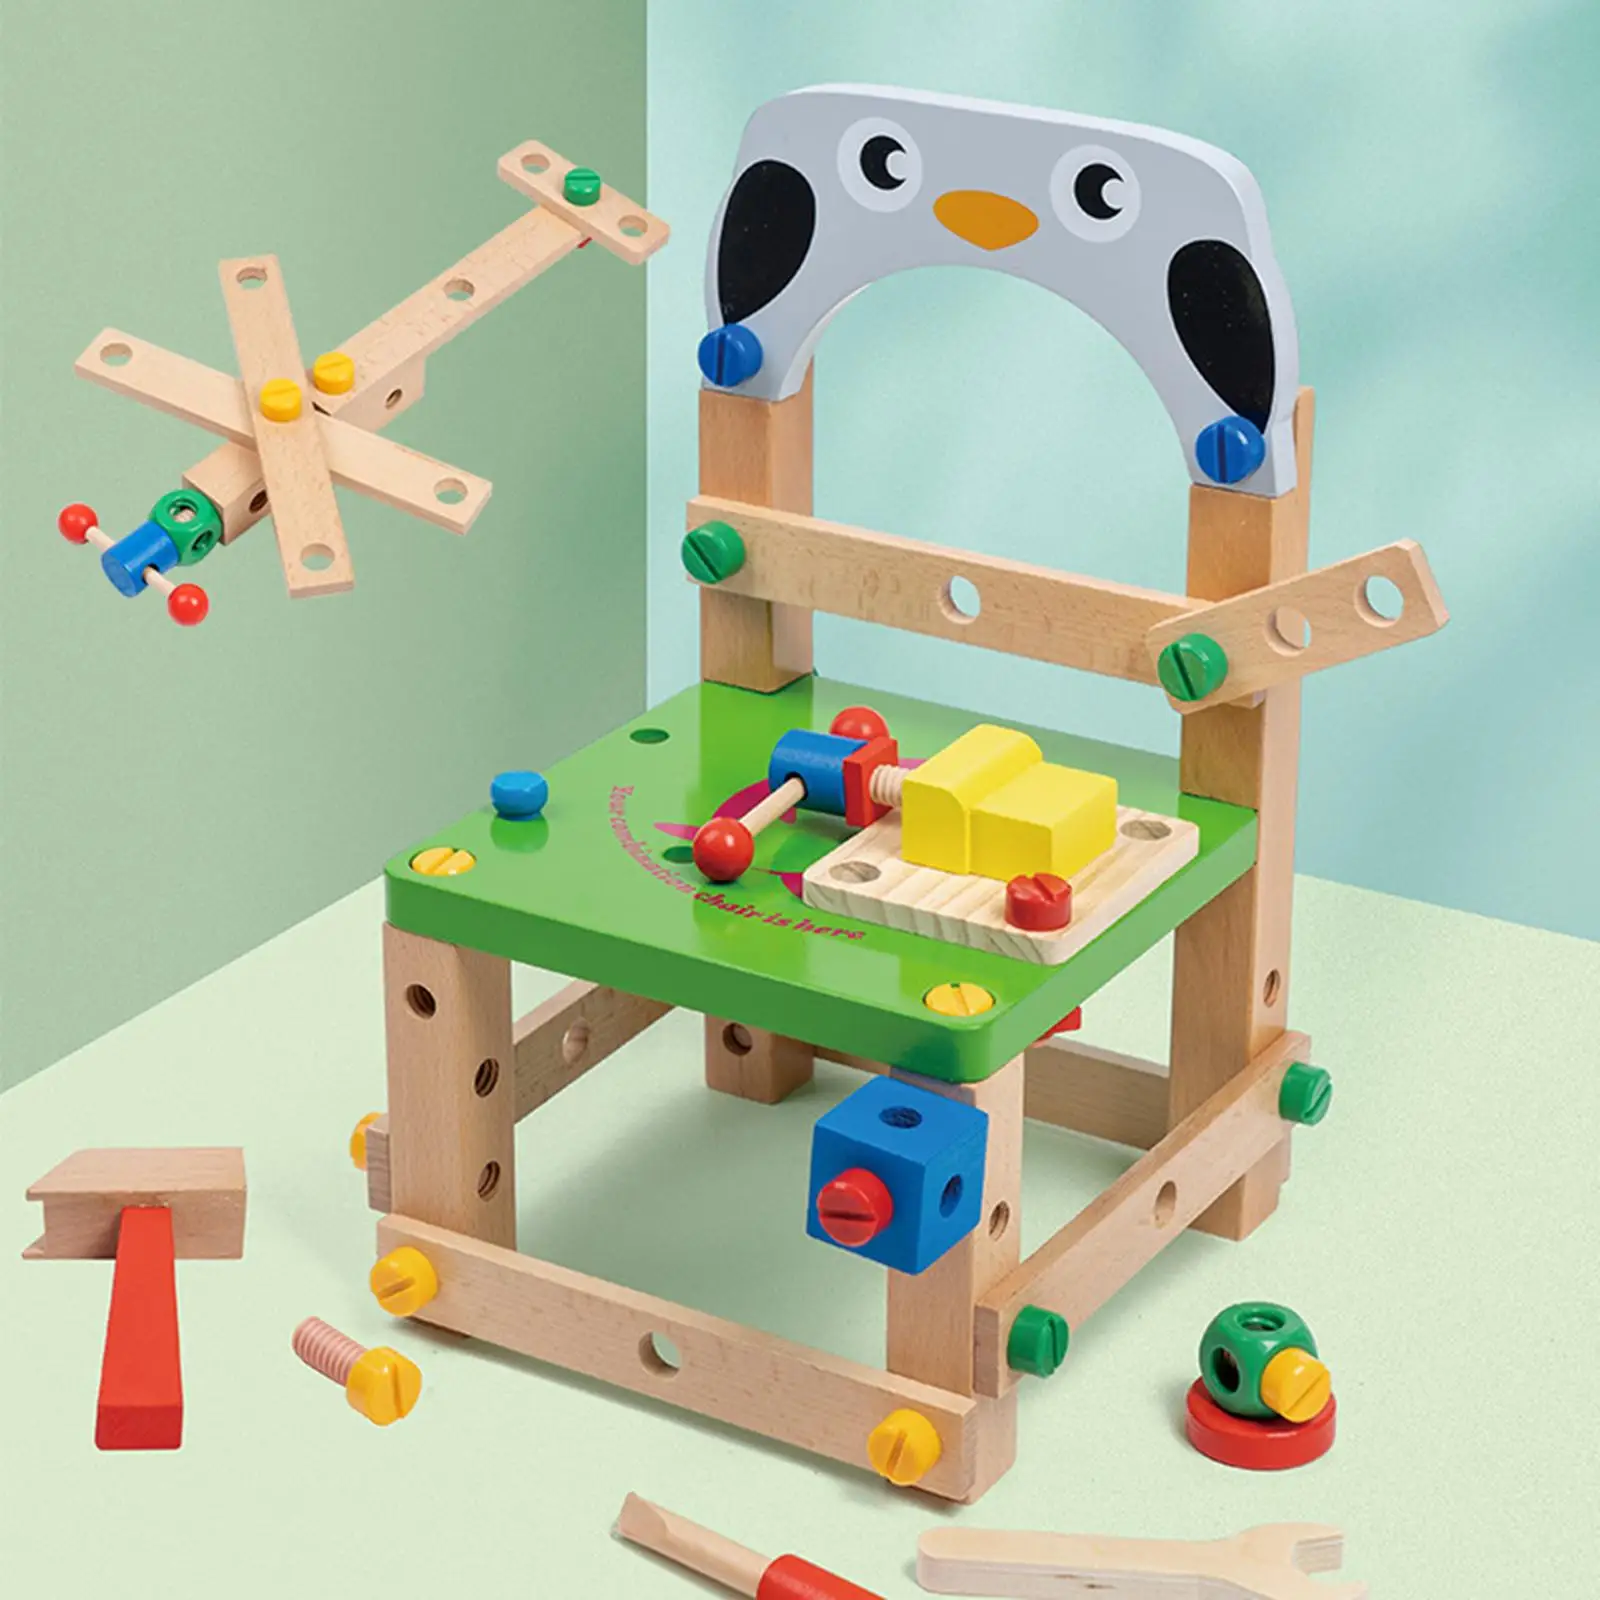 Creativity Build Your Chair Imagination Toy Set Learning Toy DIY Wooden Multifunctional Chair for Toddlers Children Kids